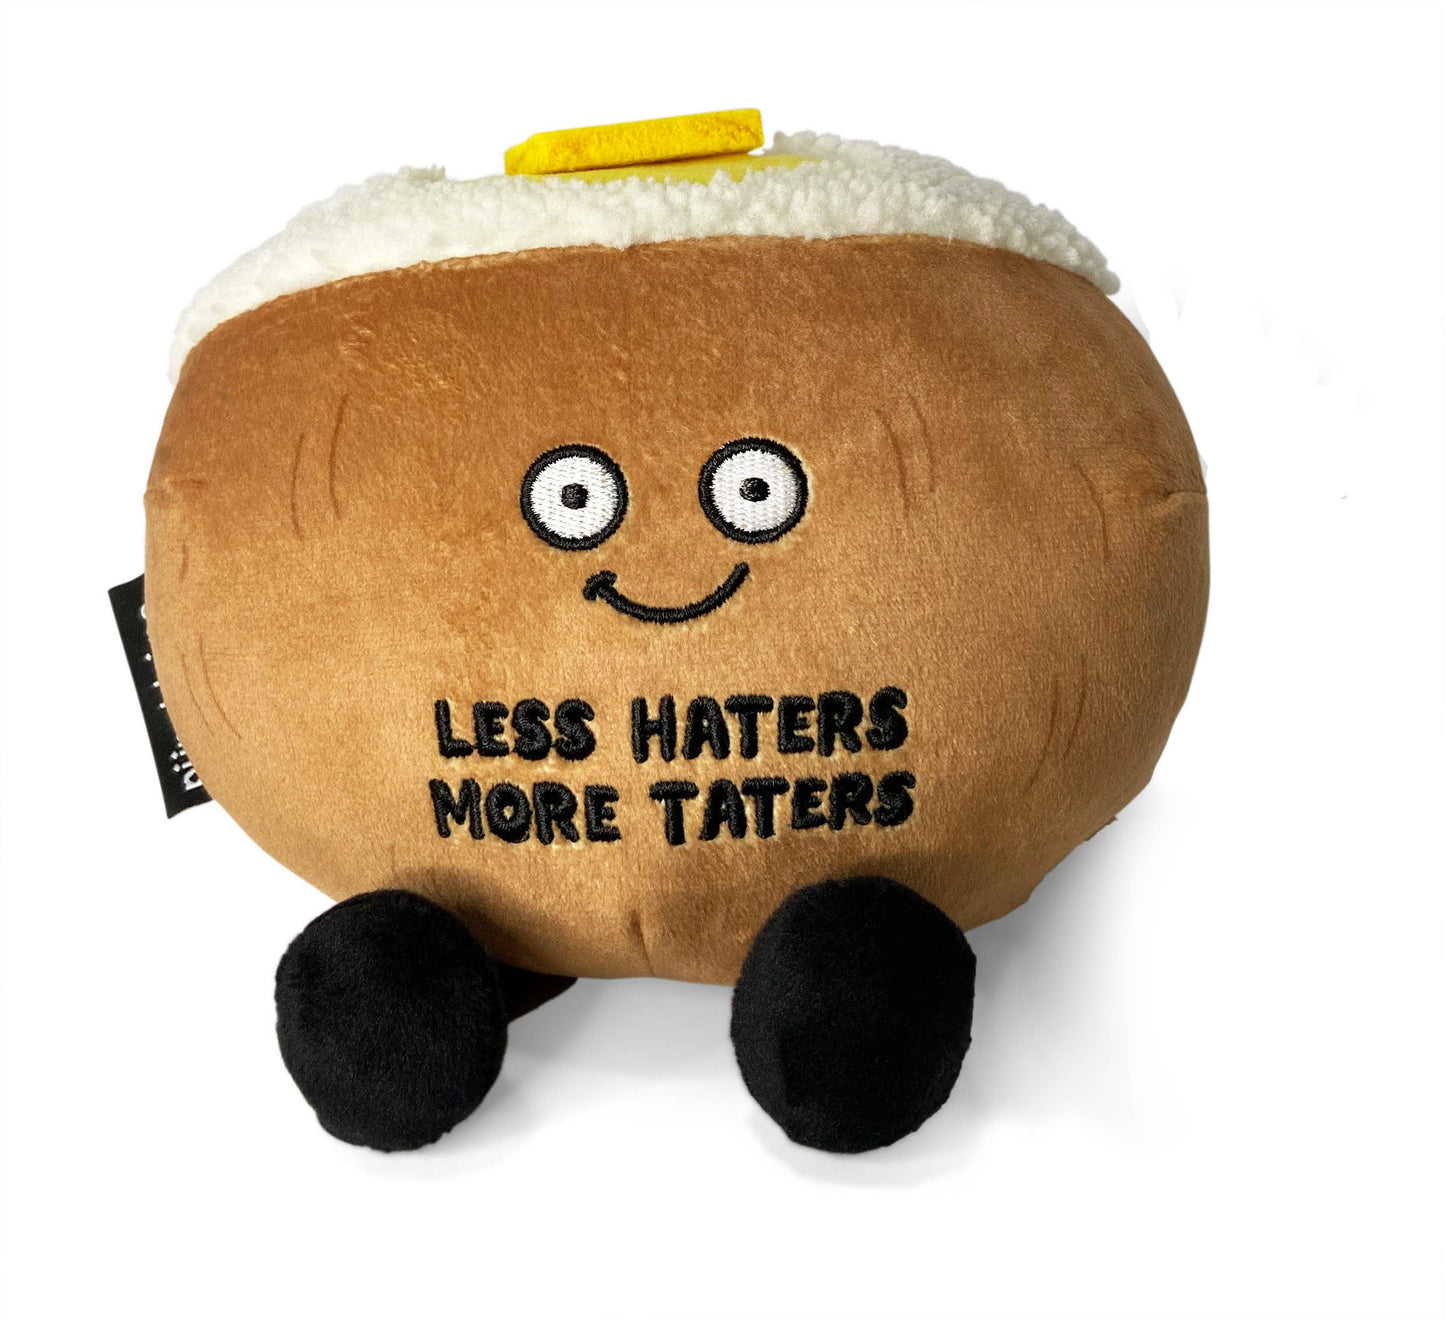 Baked potato plush toy that reads "Less Haters More Taters"